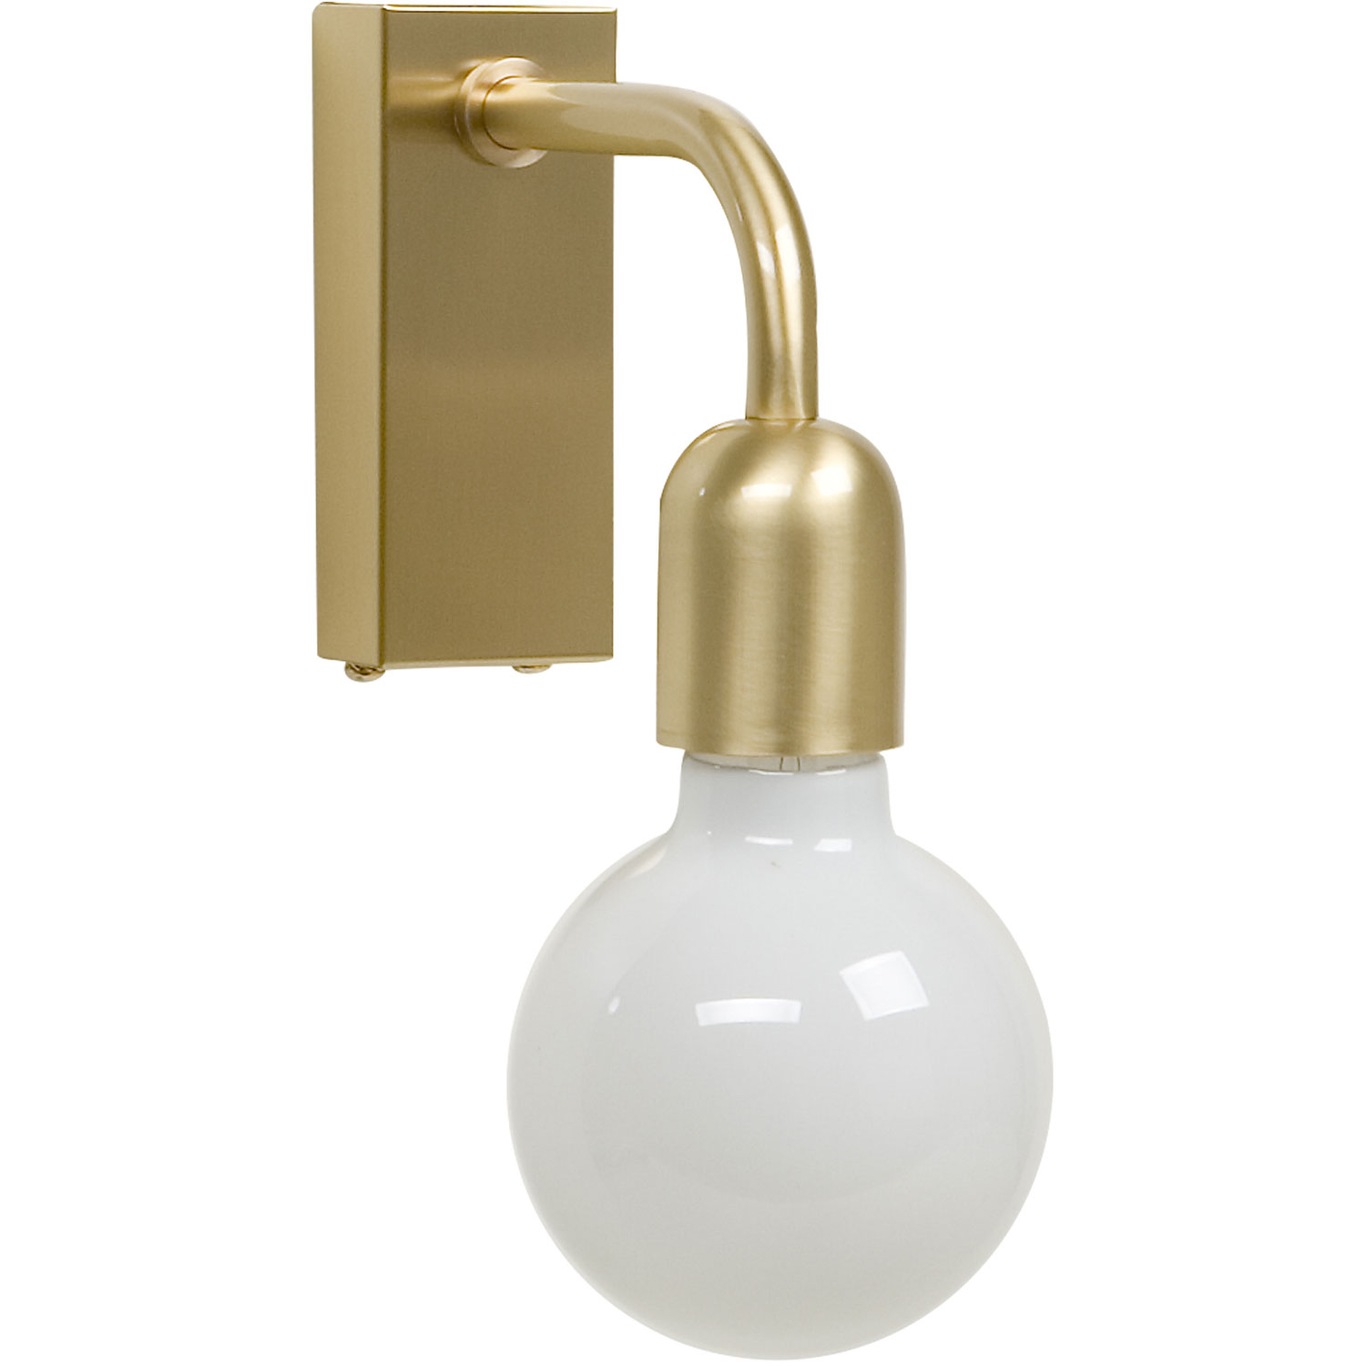 Regal 1 Wall Lamp, Brushed Brass